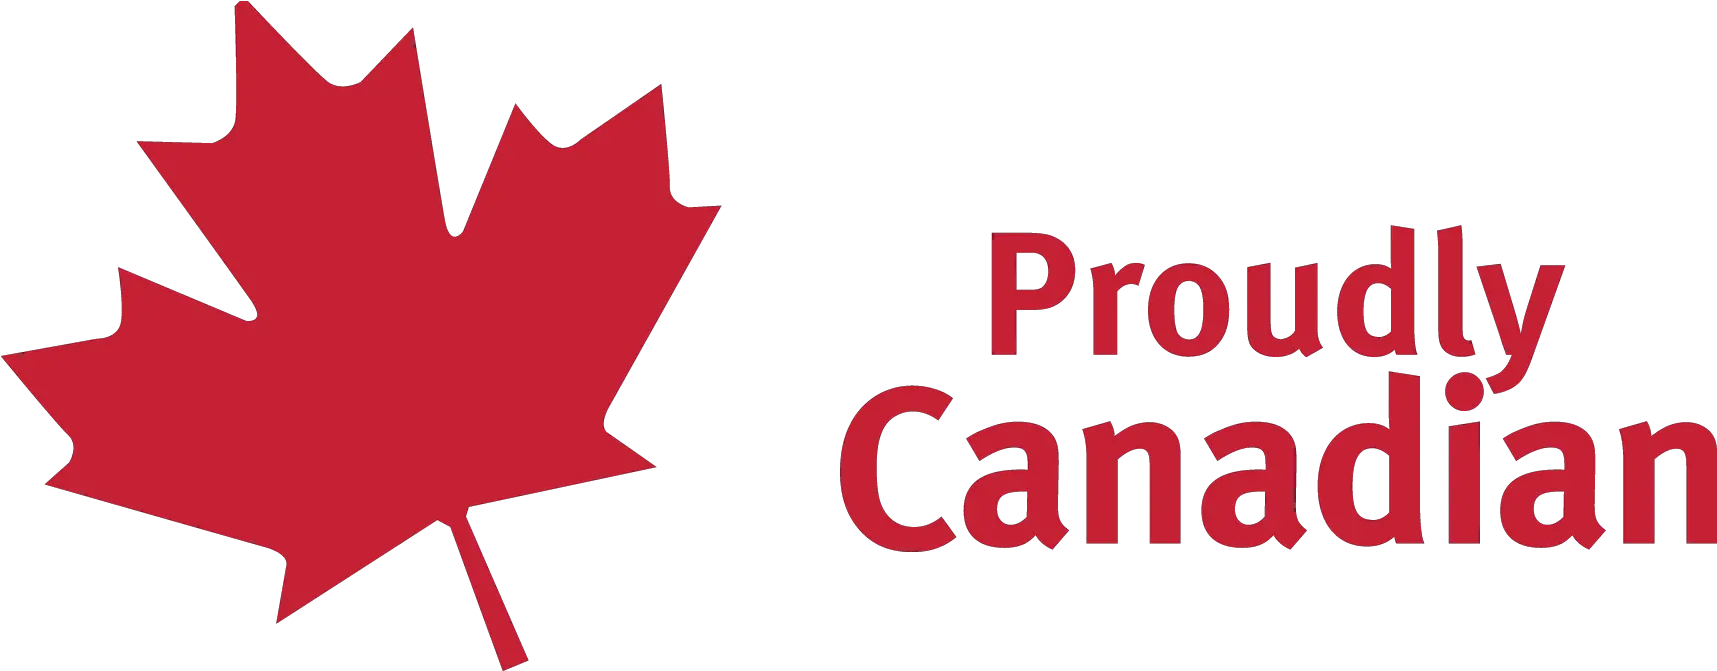 Download Maple Leaf Proudly Canadian Full Size Png Image Language Canadian Leaf Png